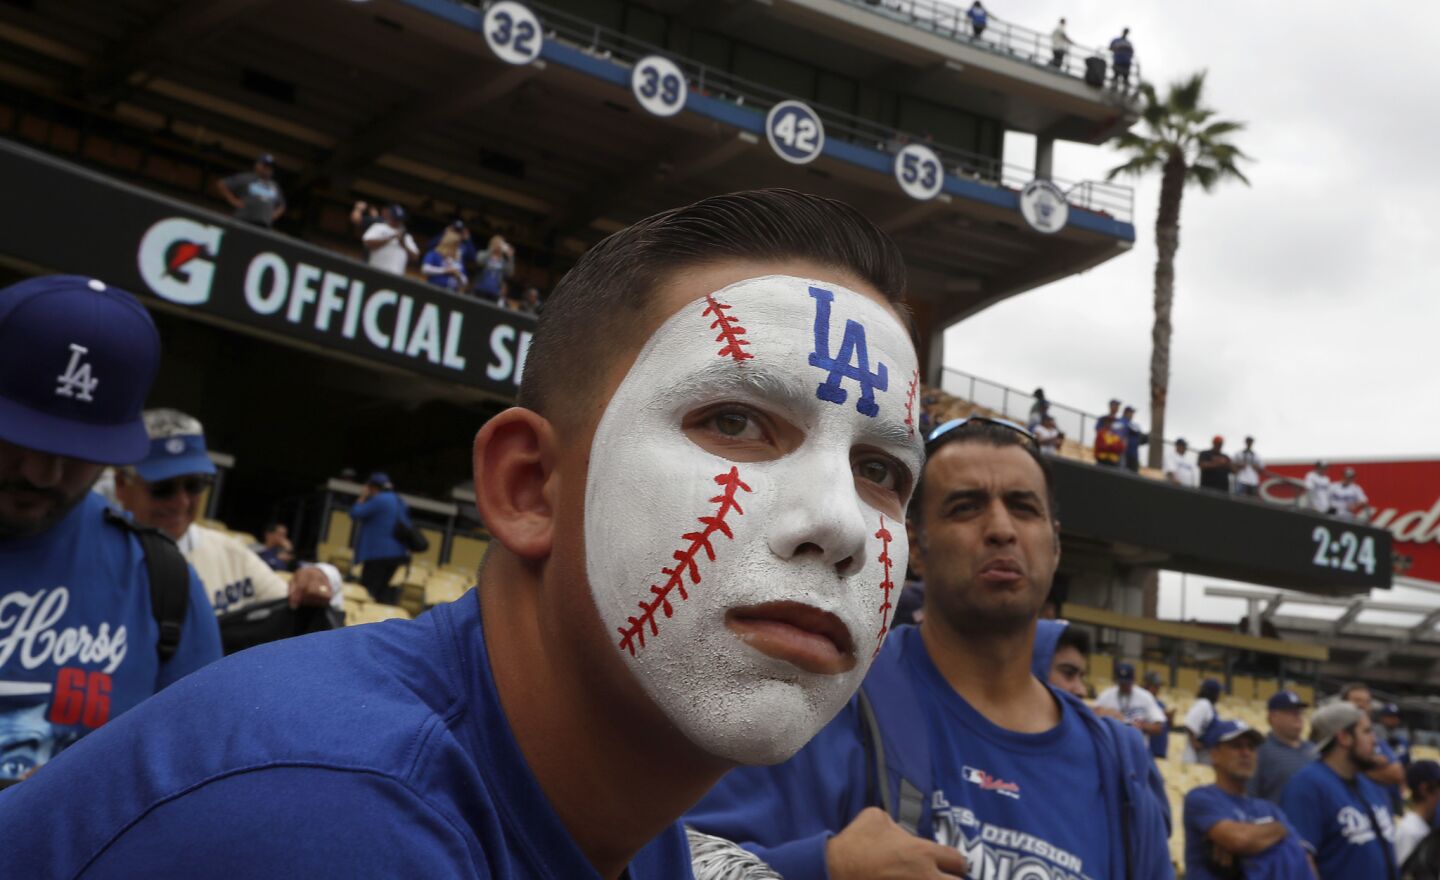 Dodger fans watch batting practice before Game 6 of the World Series at Dodger Stadium.